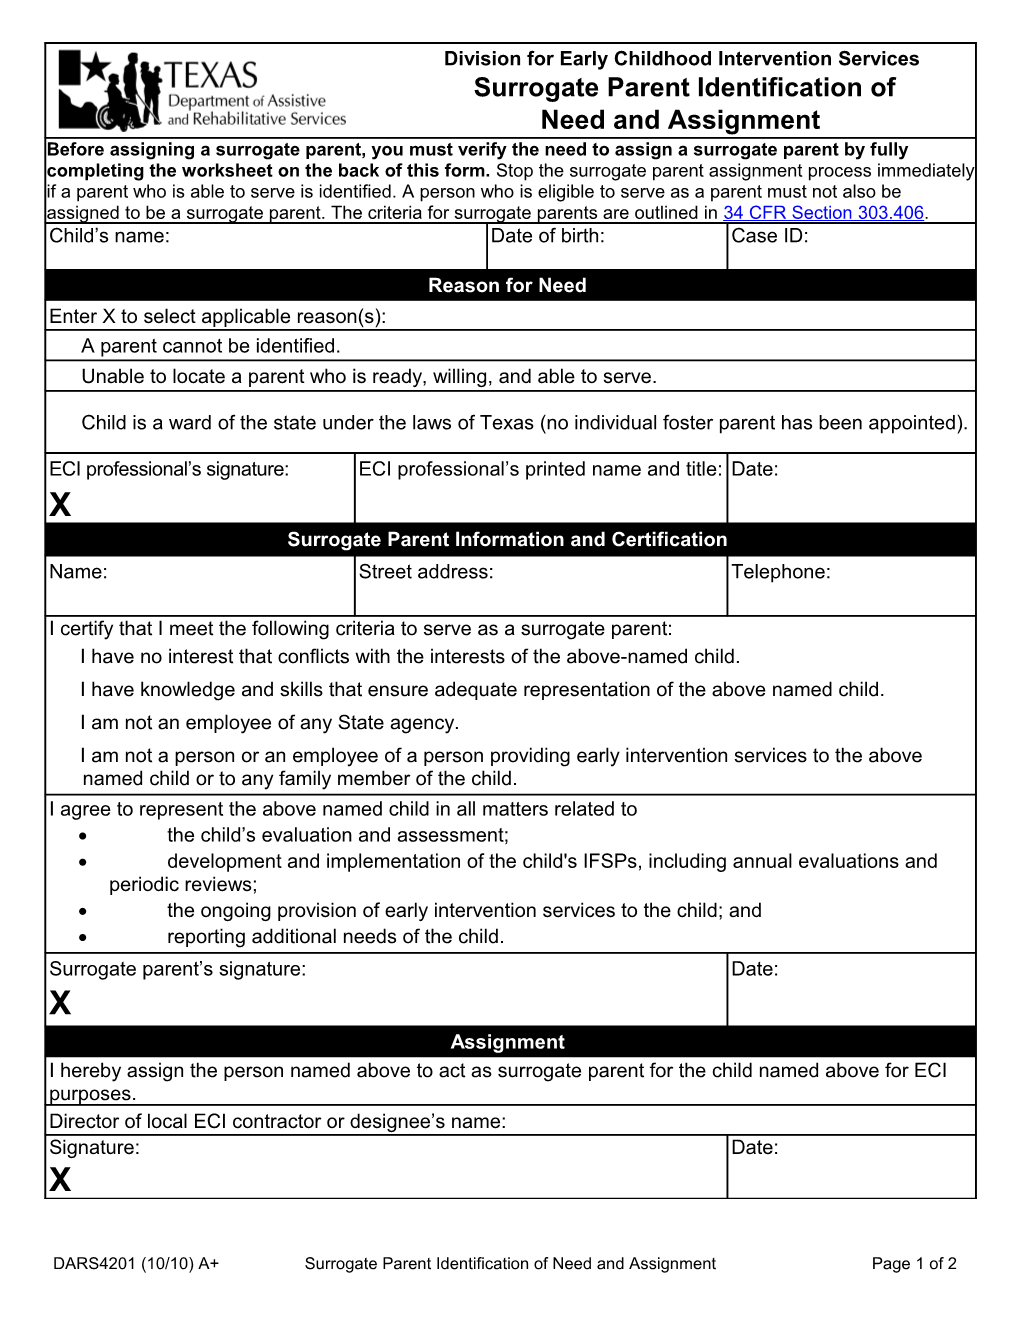 DARS4201 (10/10) A+ Surrogate Parent Identification of Need and Assignment Page 2 of 2